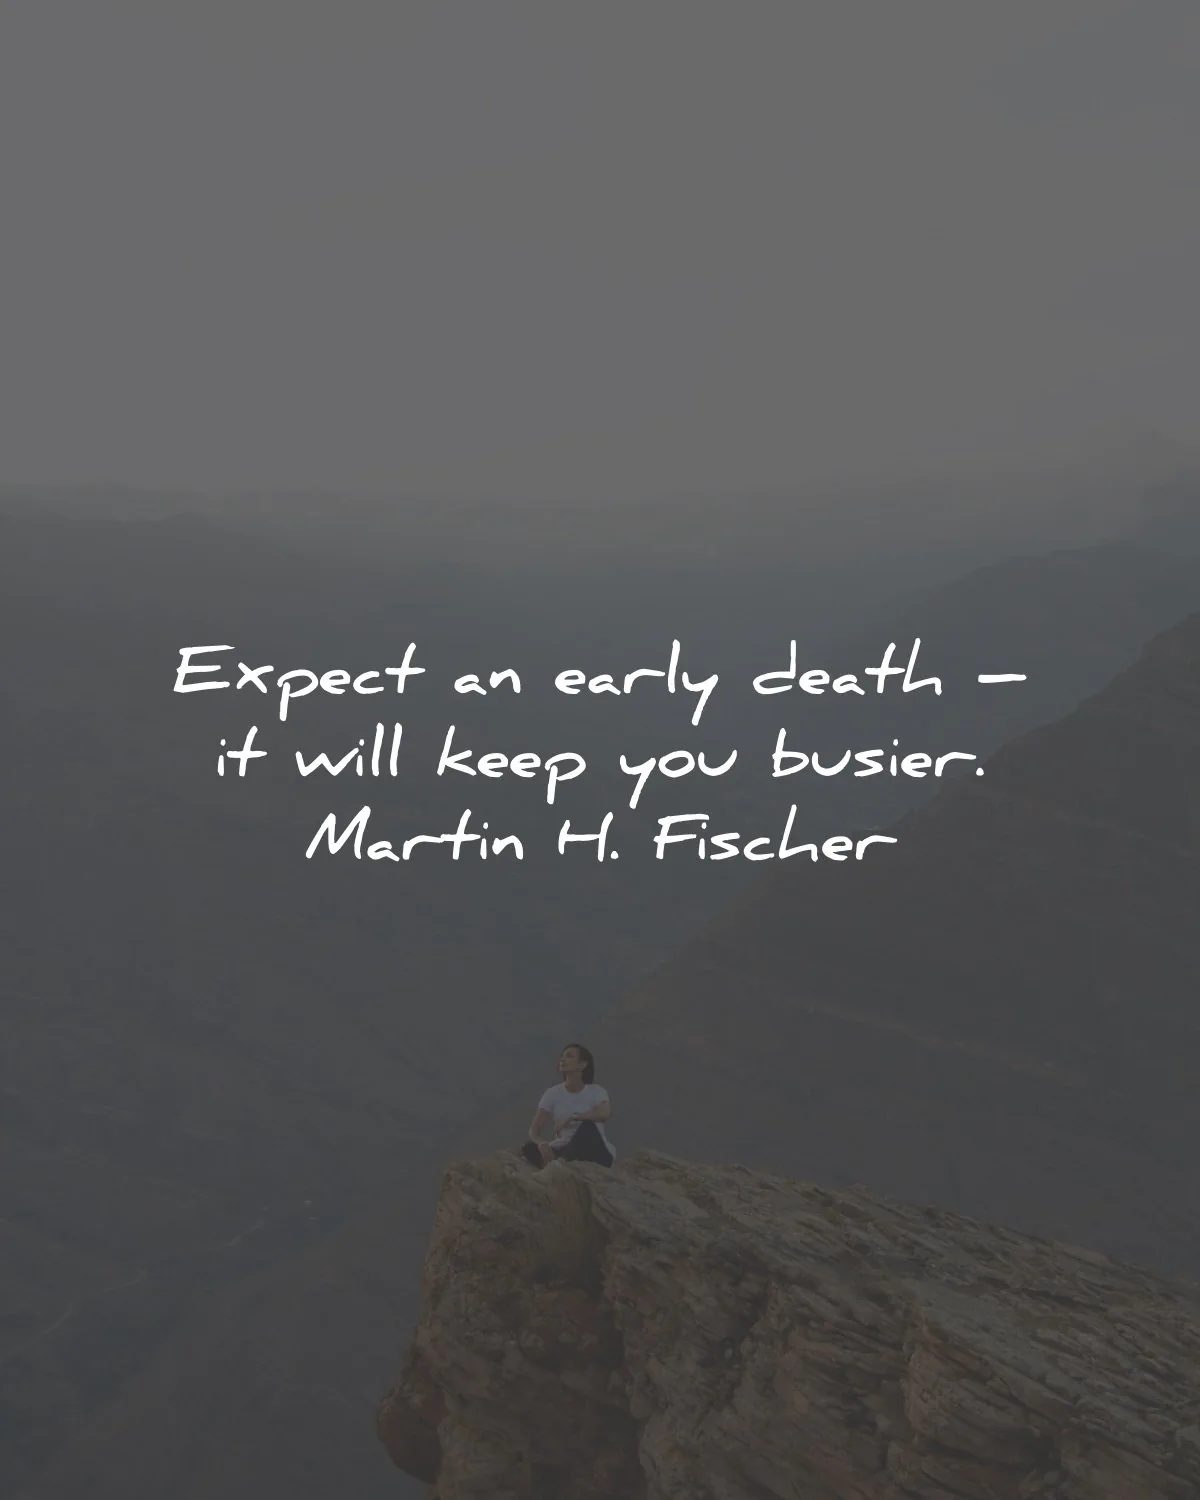 life is short quotes expect early death keep you busier martin fischer wisdom